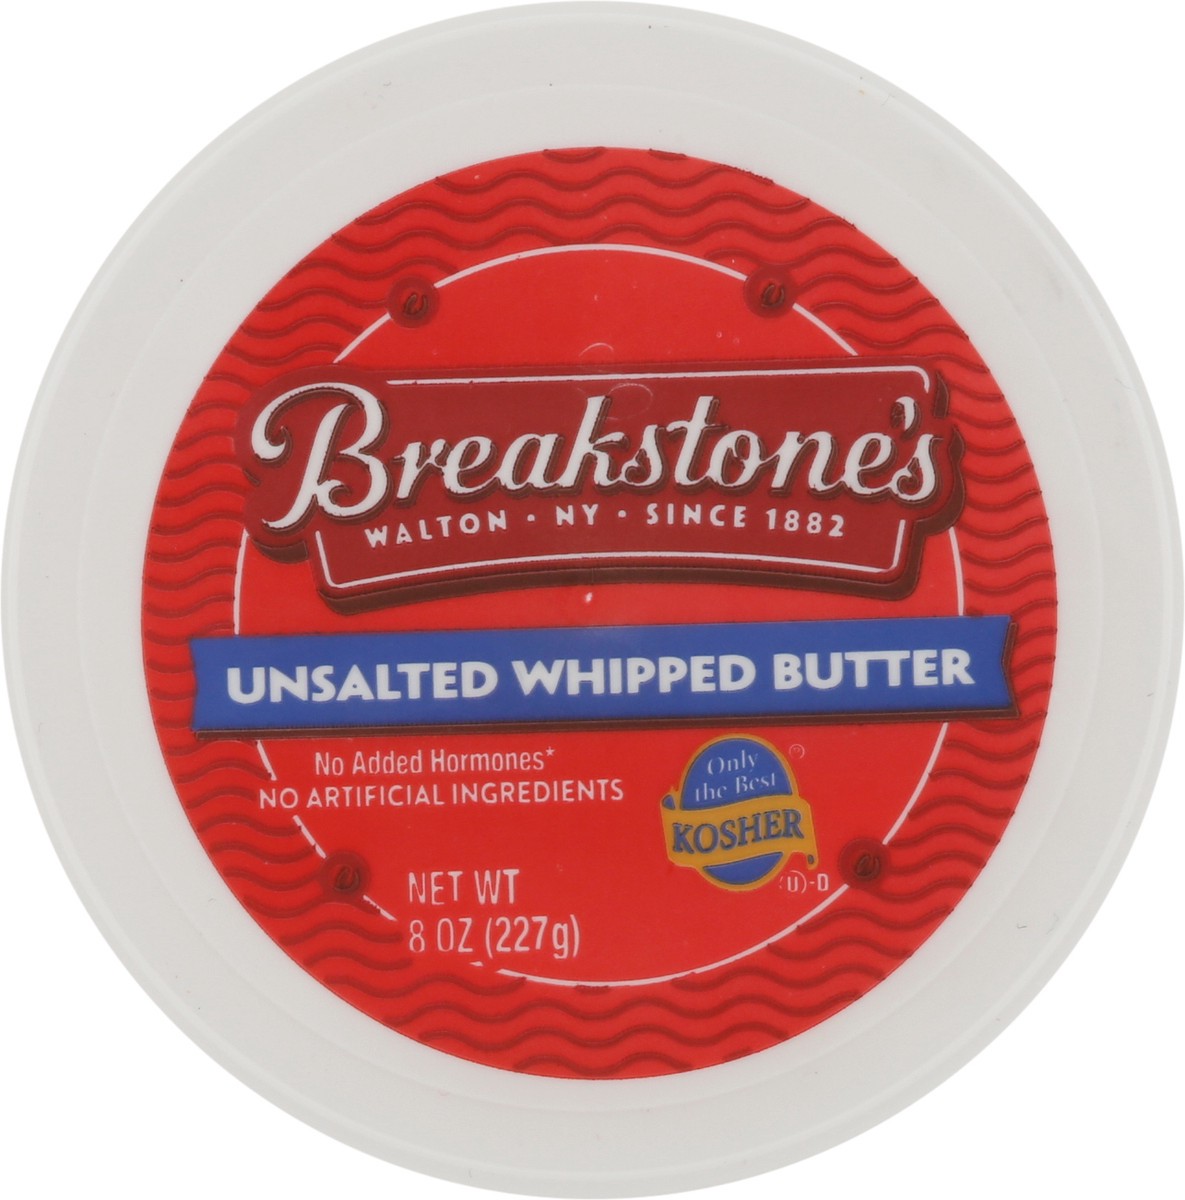 slide 9 of 9, Breakstone's Whipped Butter, Unsalted, 8 ct